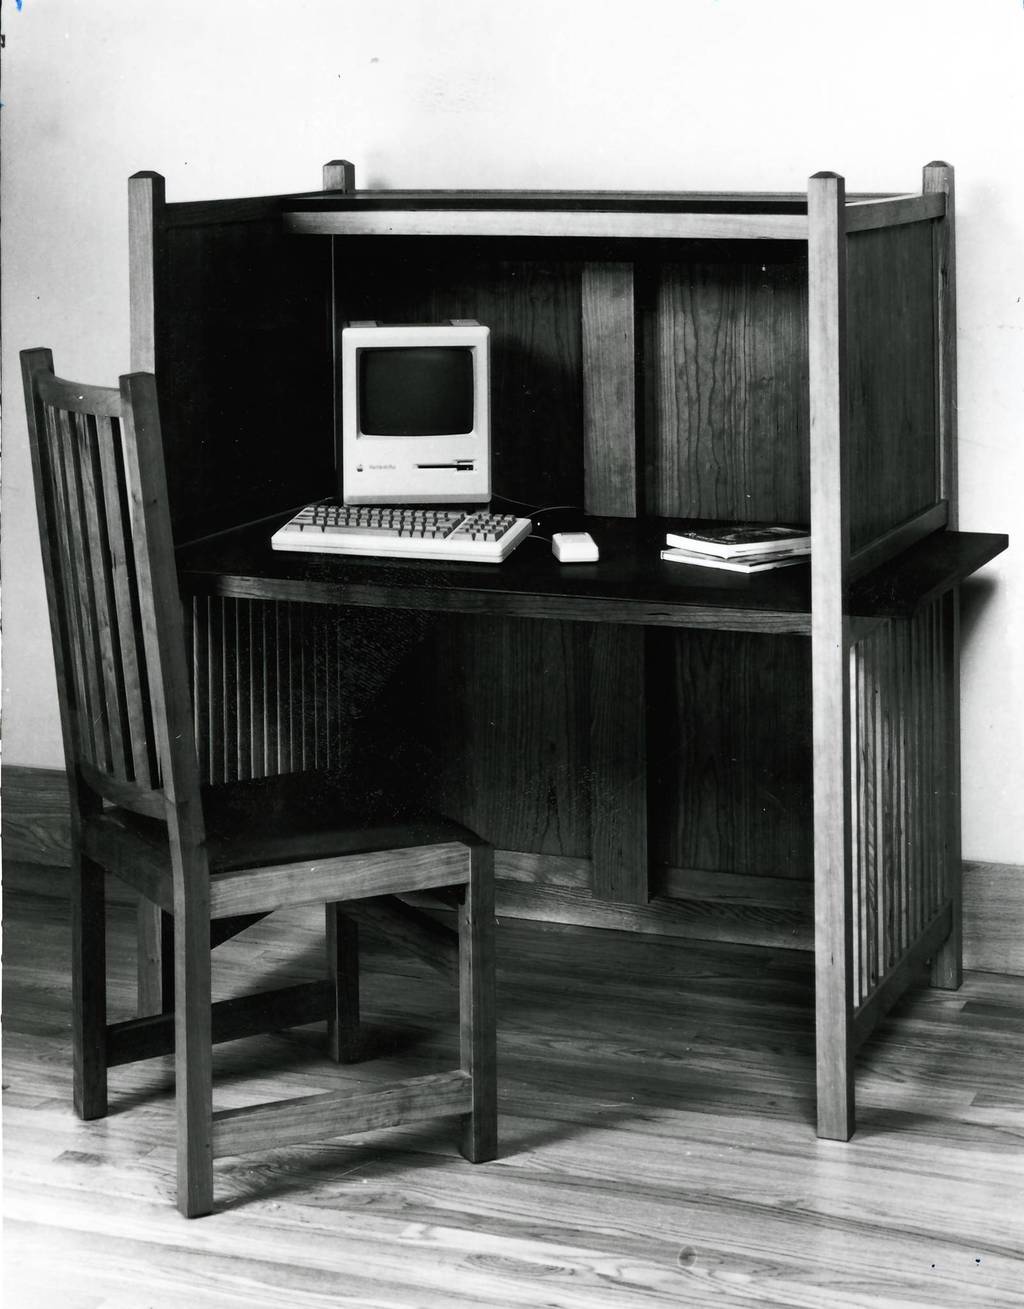 Macintosh Plus computer. The picture was published in 1991.